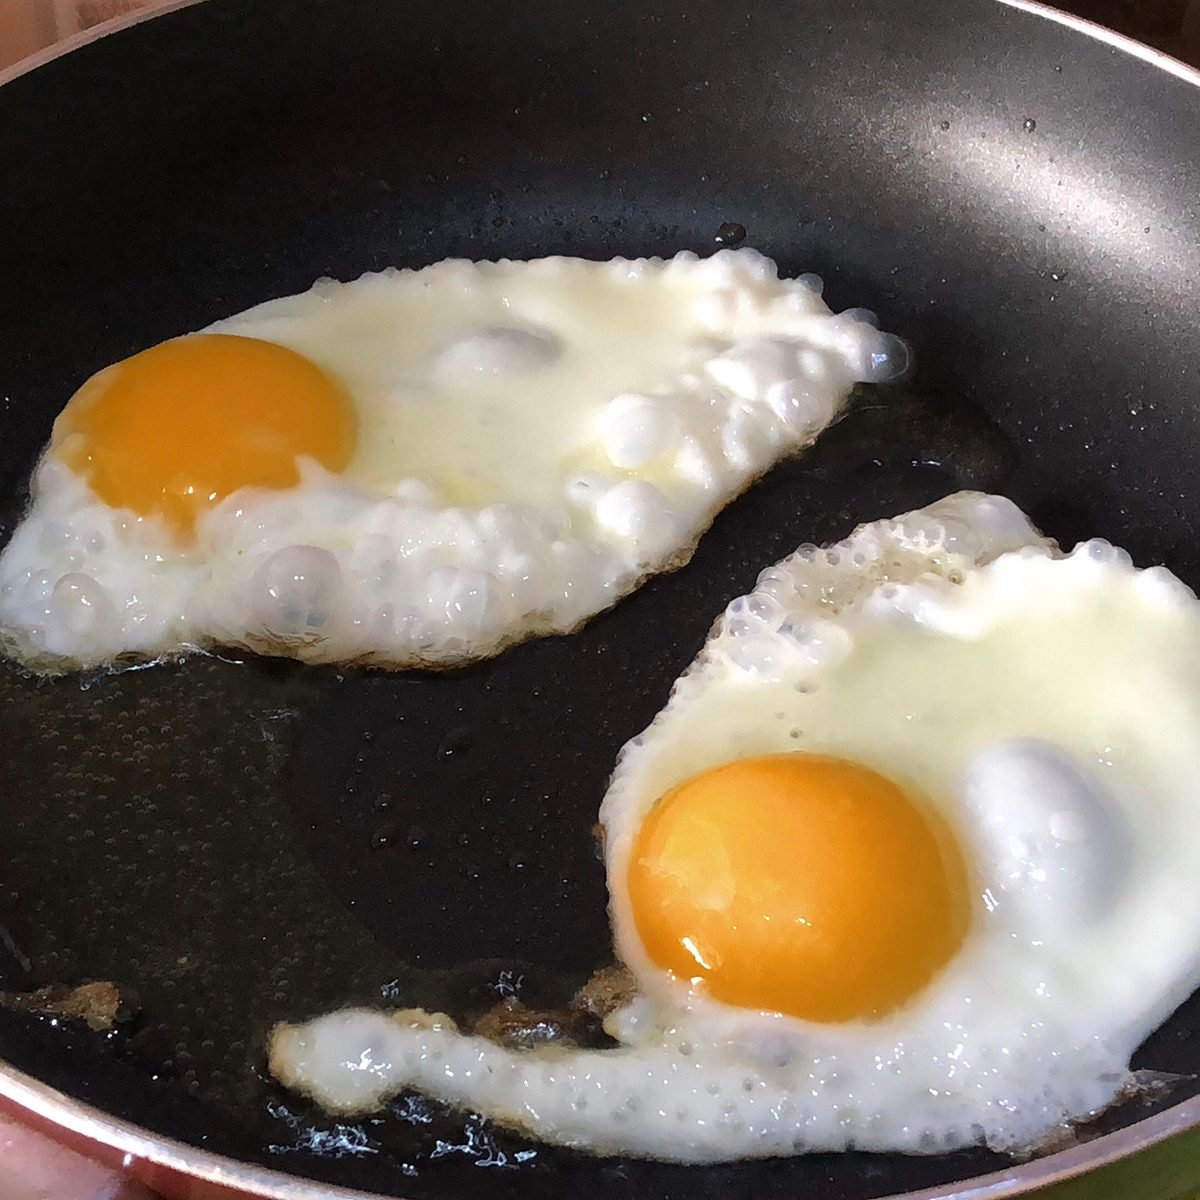 https://www.tasteofhome.com/wp-content/uploads/2020/02/image-of-fried-eggs-cooking-in-non-stick-frying-pan-GettyImages-1090436260.jpg?fit=700%2C700